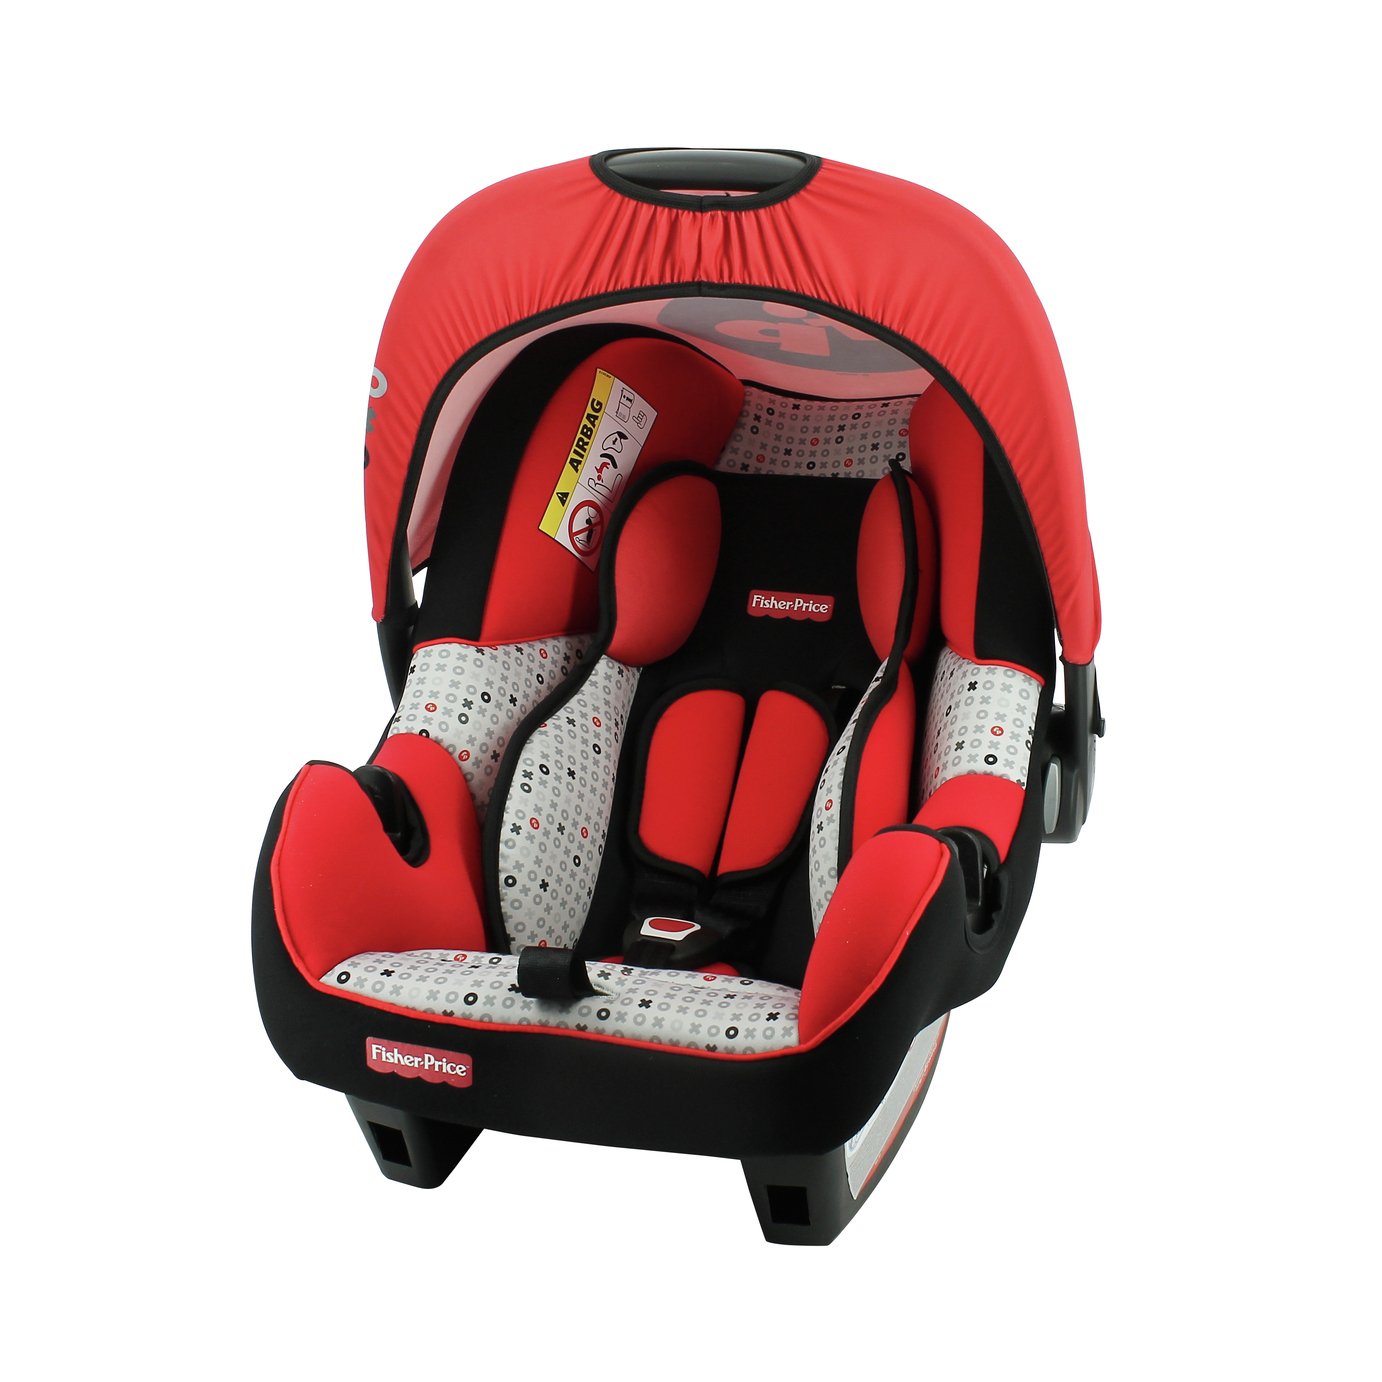 fisher price baby car seat